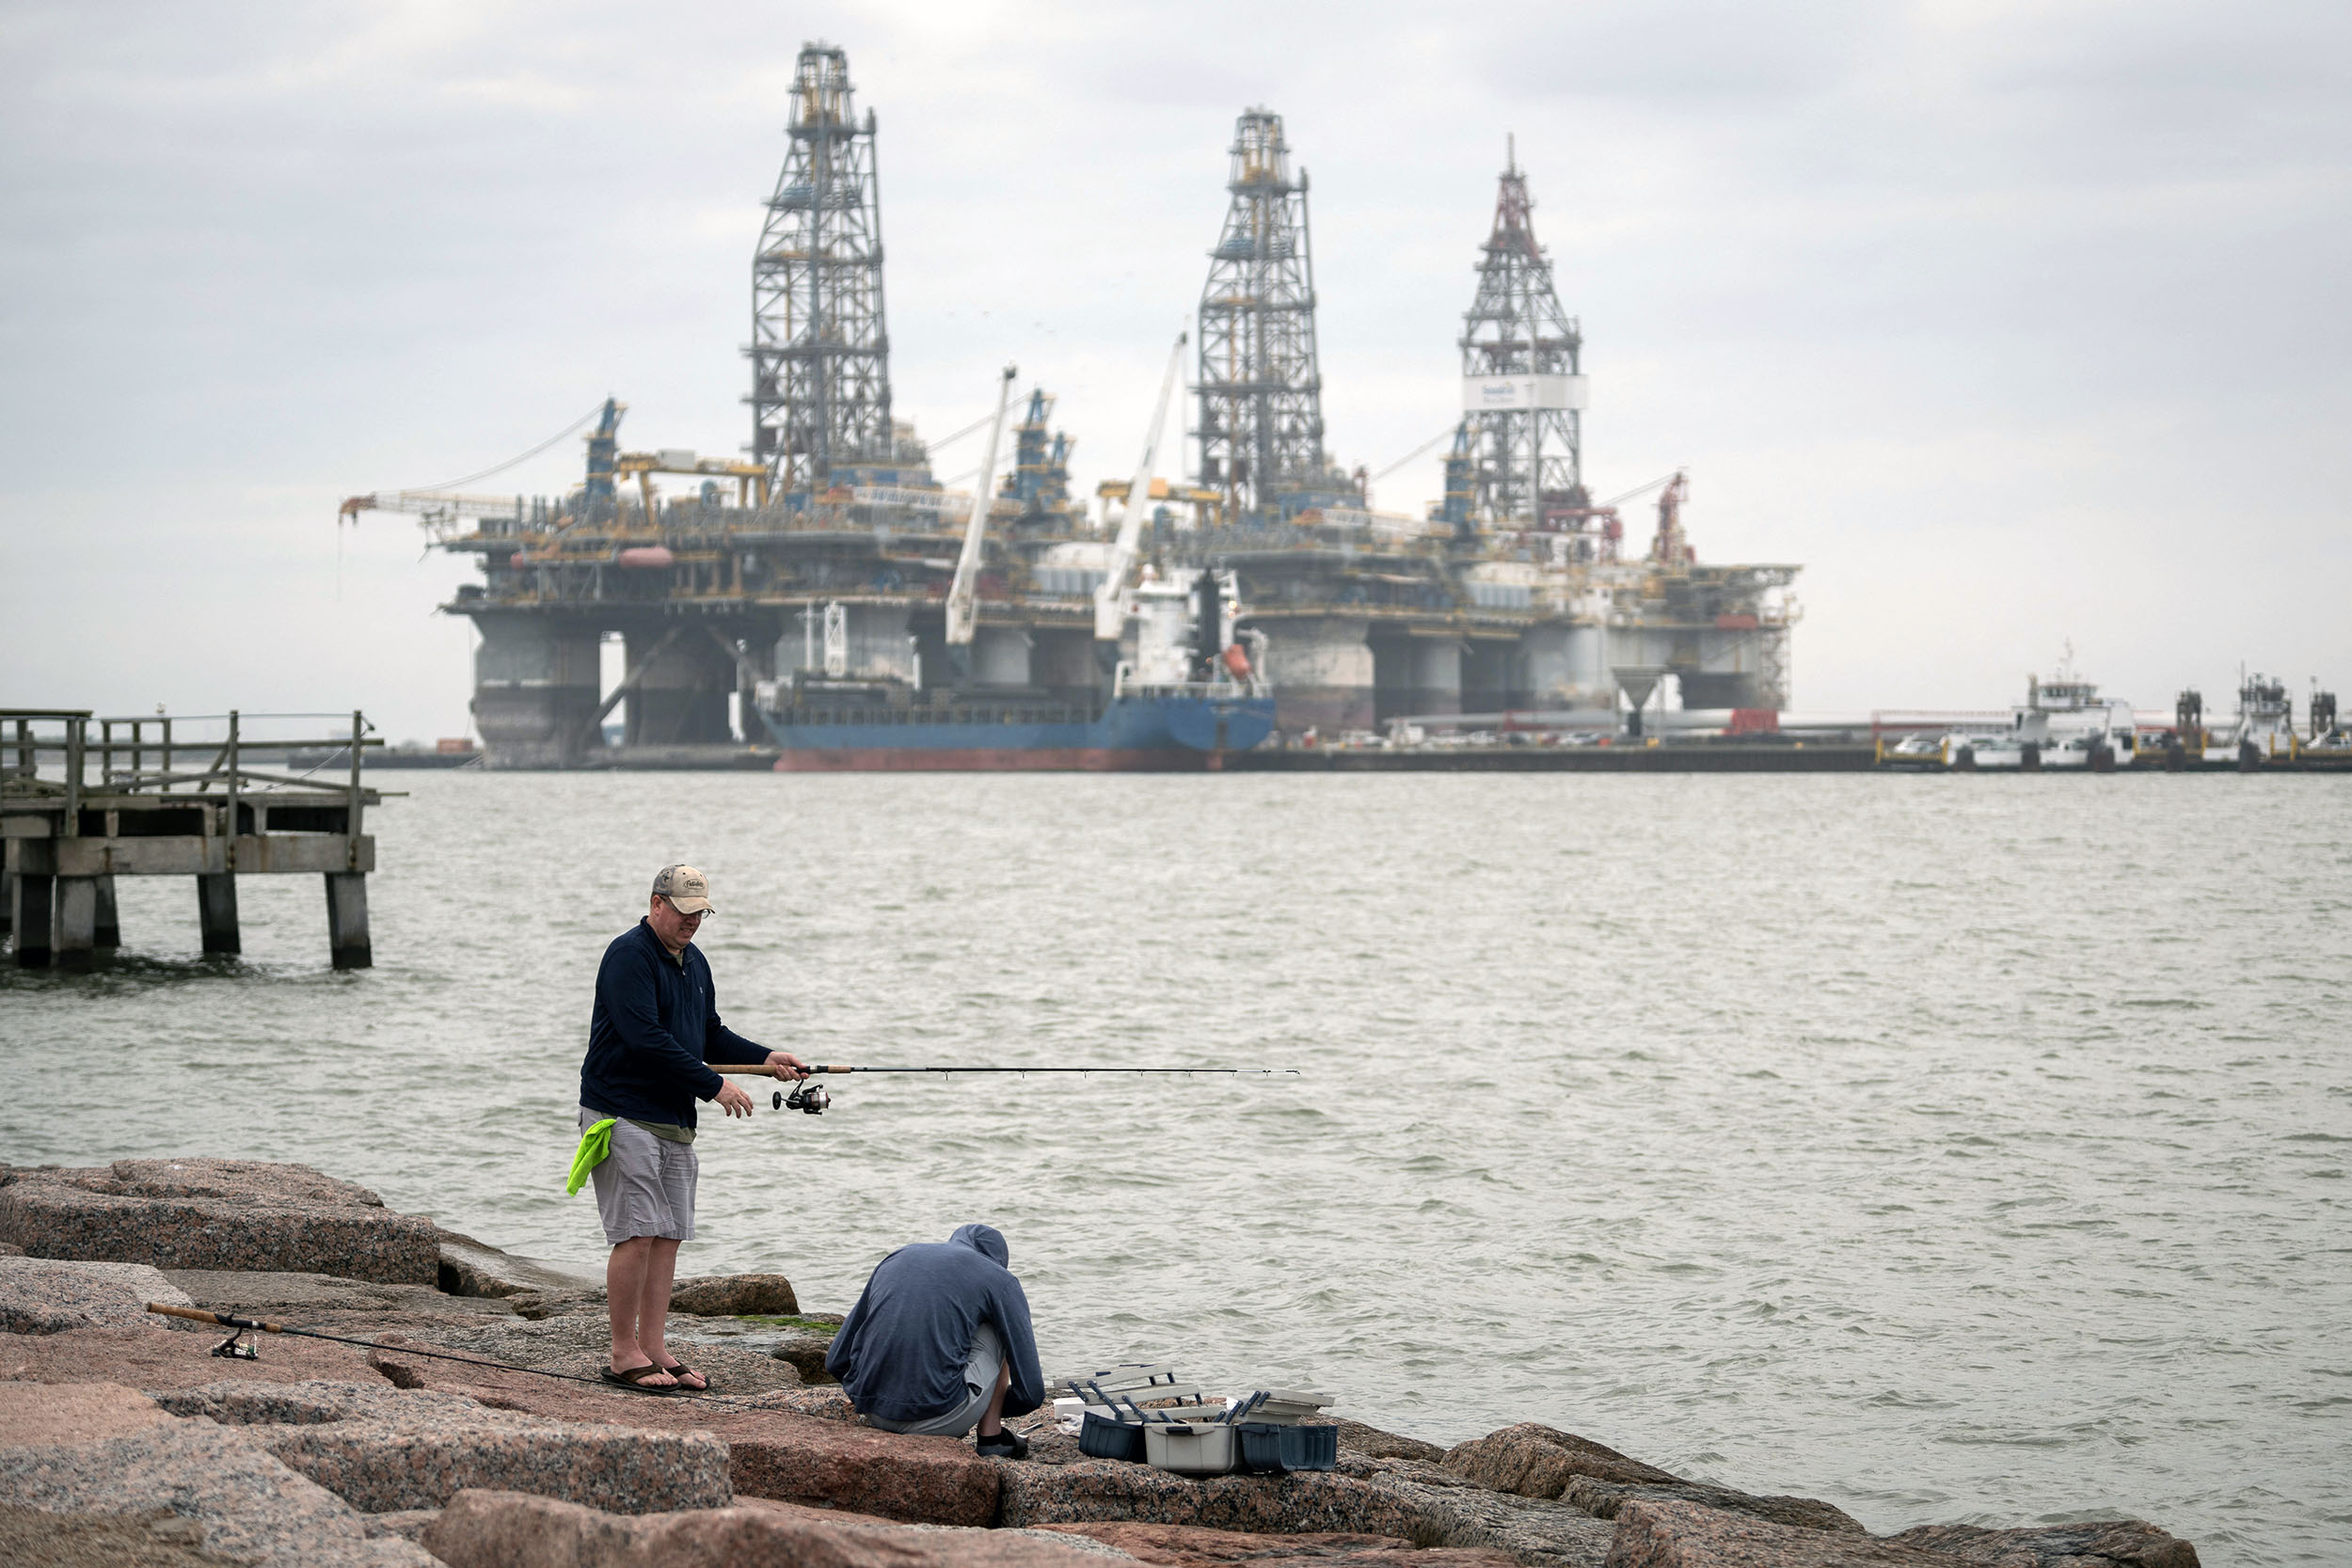 People fish in front of defunct oil drilling rigs in the Corpus Christi Ship Channel at Aransas Pass on March 11, 2019, in Port Aransas, Texas. - To realize America's soaring energy export ambitions, the port of Corpus Christi in Texas is pulling out all the stops: giant new oil pipelines, terminal expansions and undersea construction at considerable environmental costs. (Photo by Loren ELLIOTT / AFP)